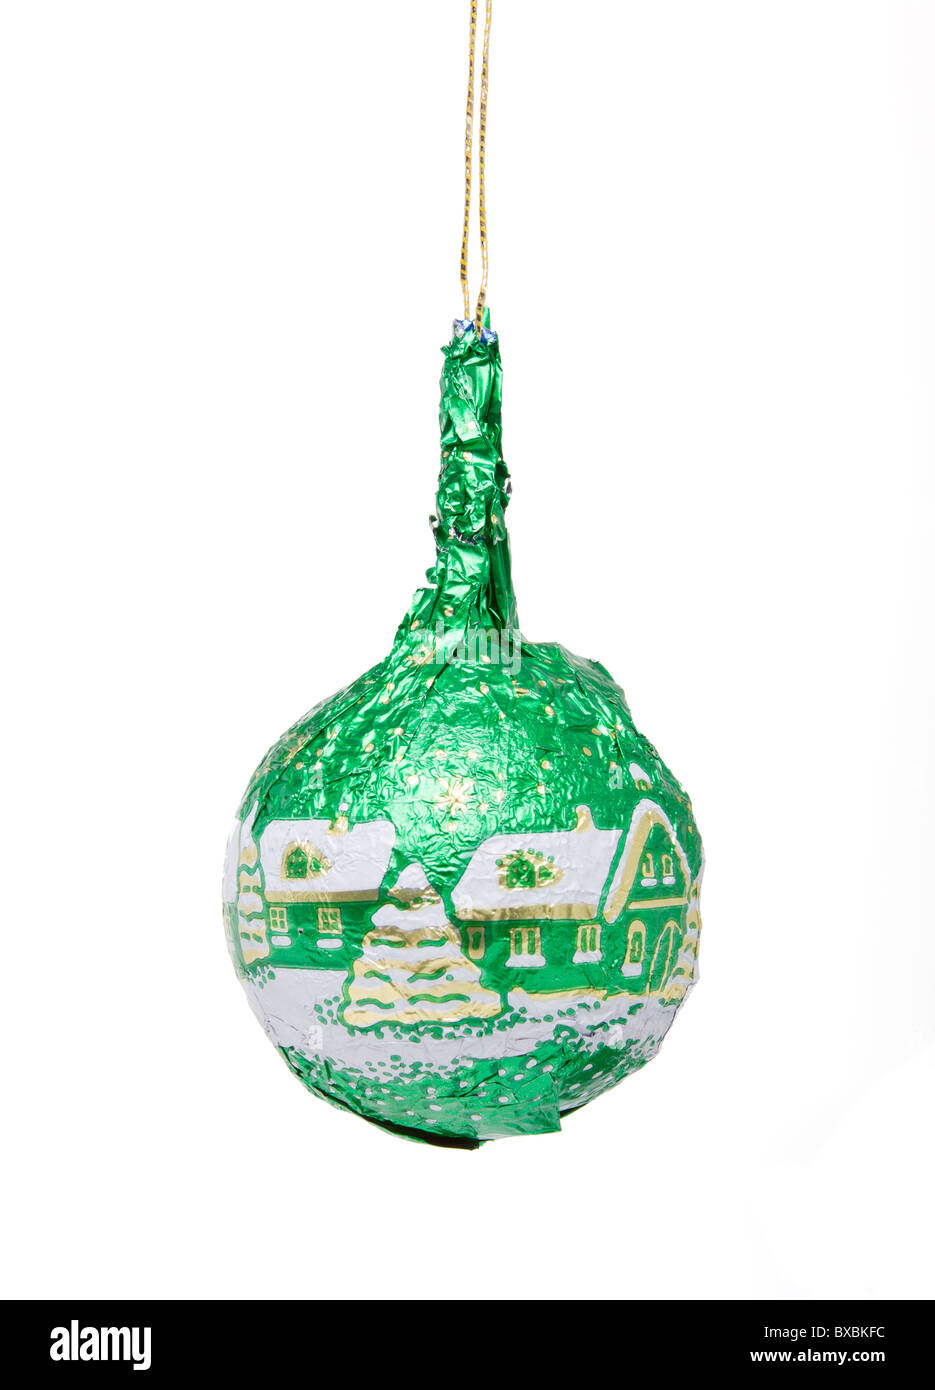 Green foil wrapped Chocolate Bauble xmas tree decoration isolated on white. Stock Photo